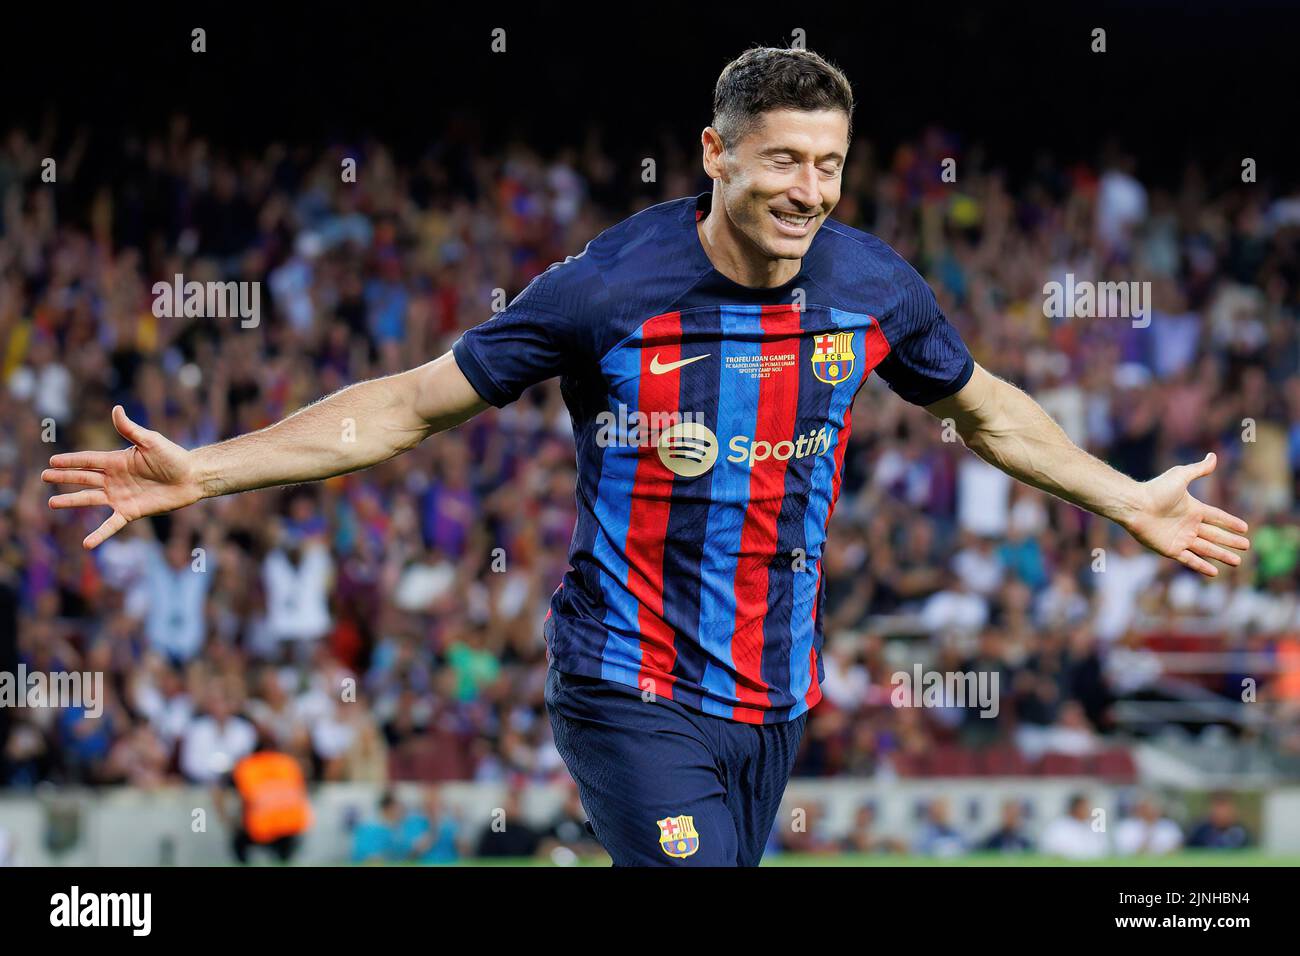 BARCELONA - AUG 7: Lewandowski celebrates after scoring a goal during the Joan Gamper Throphy match between FC Barcelona and Pumas at the Camp Nou Sta Stock Photo